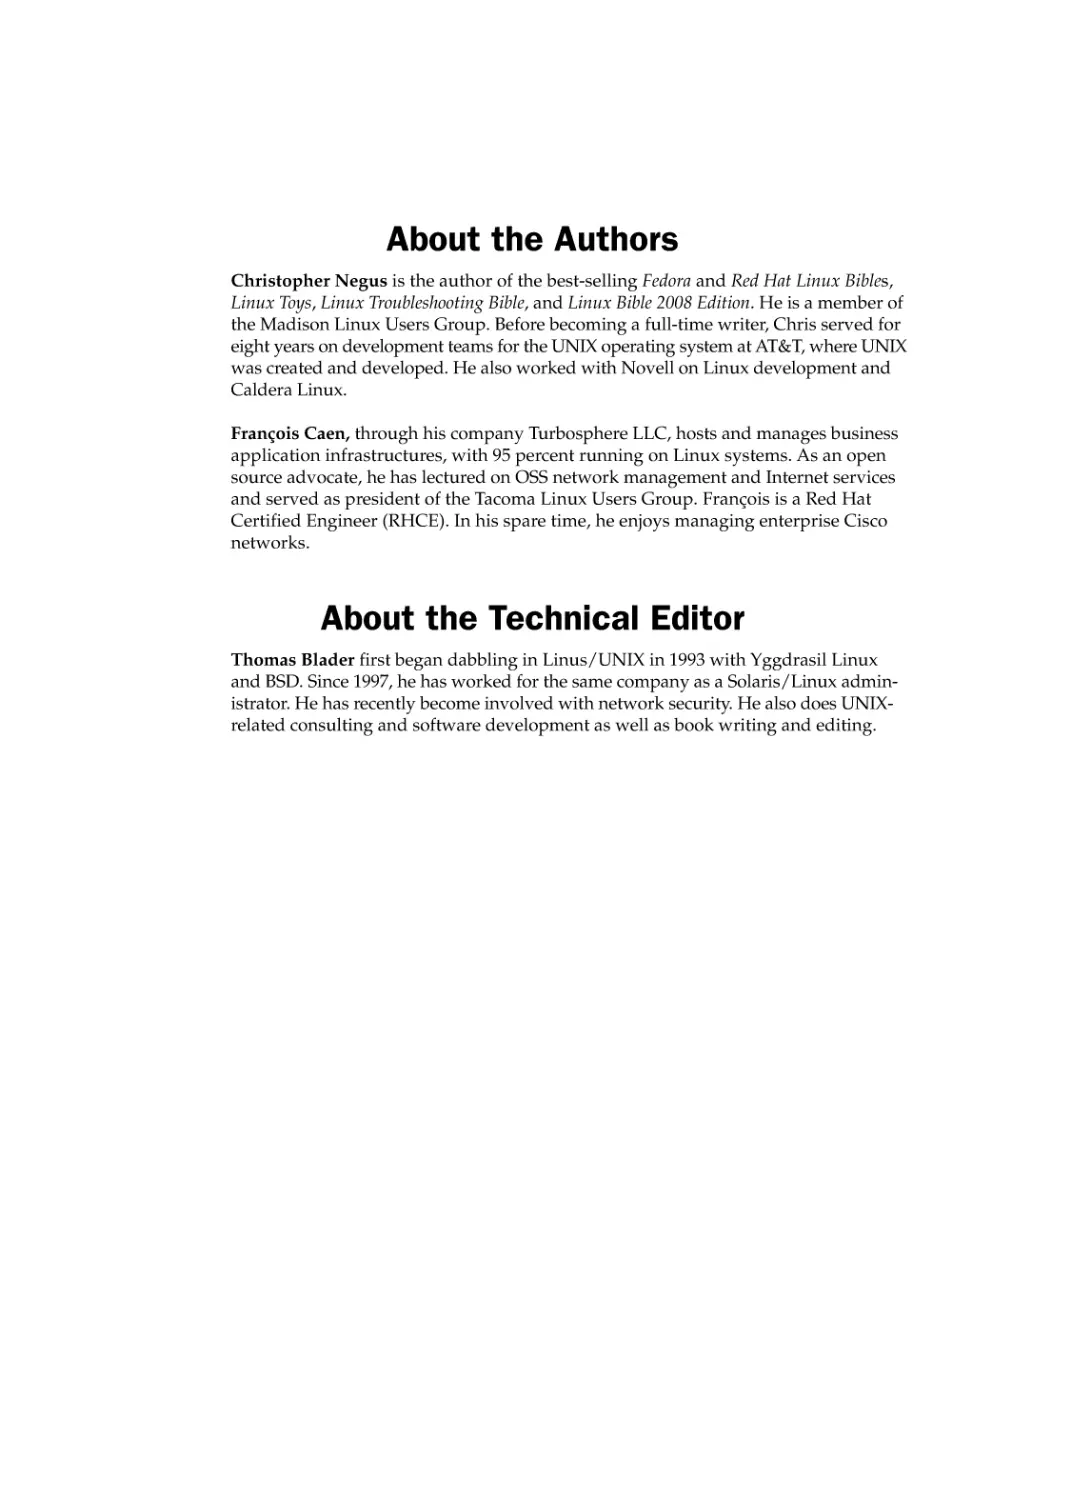 About the Authors
About the Technical Editor